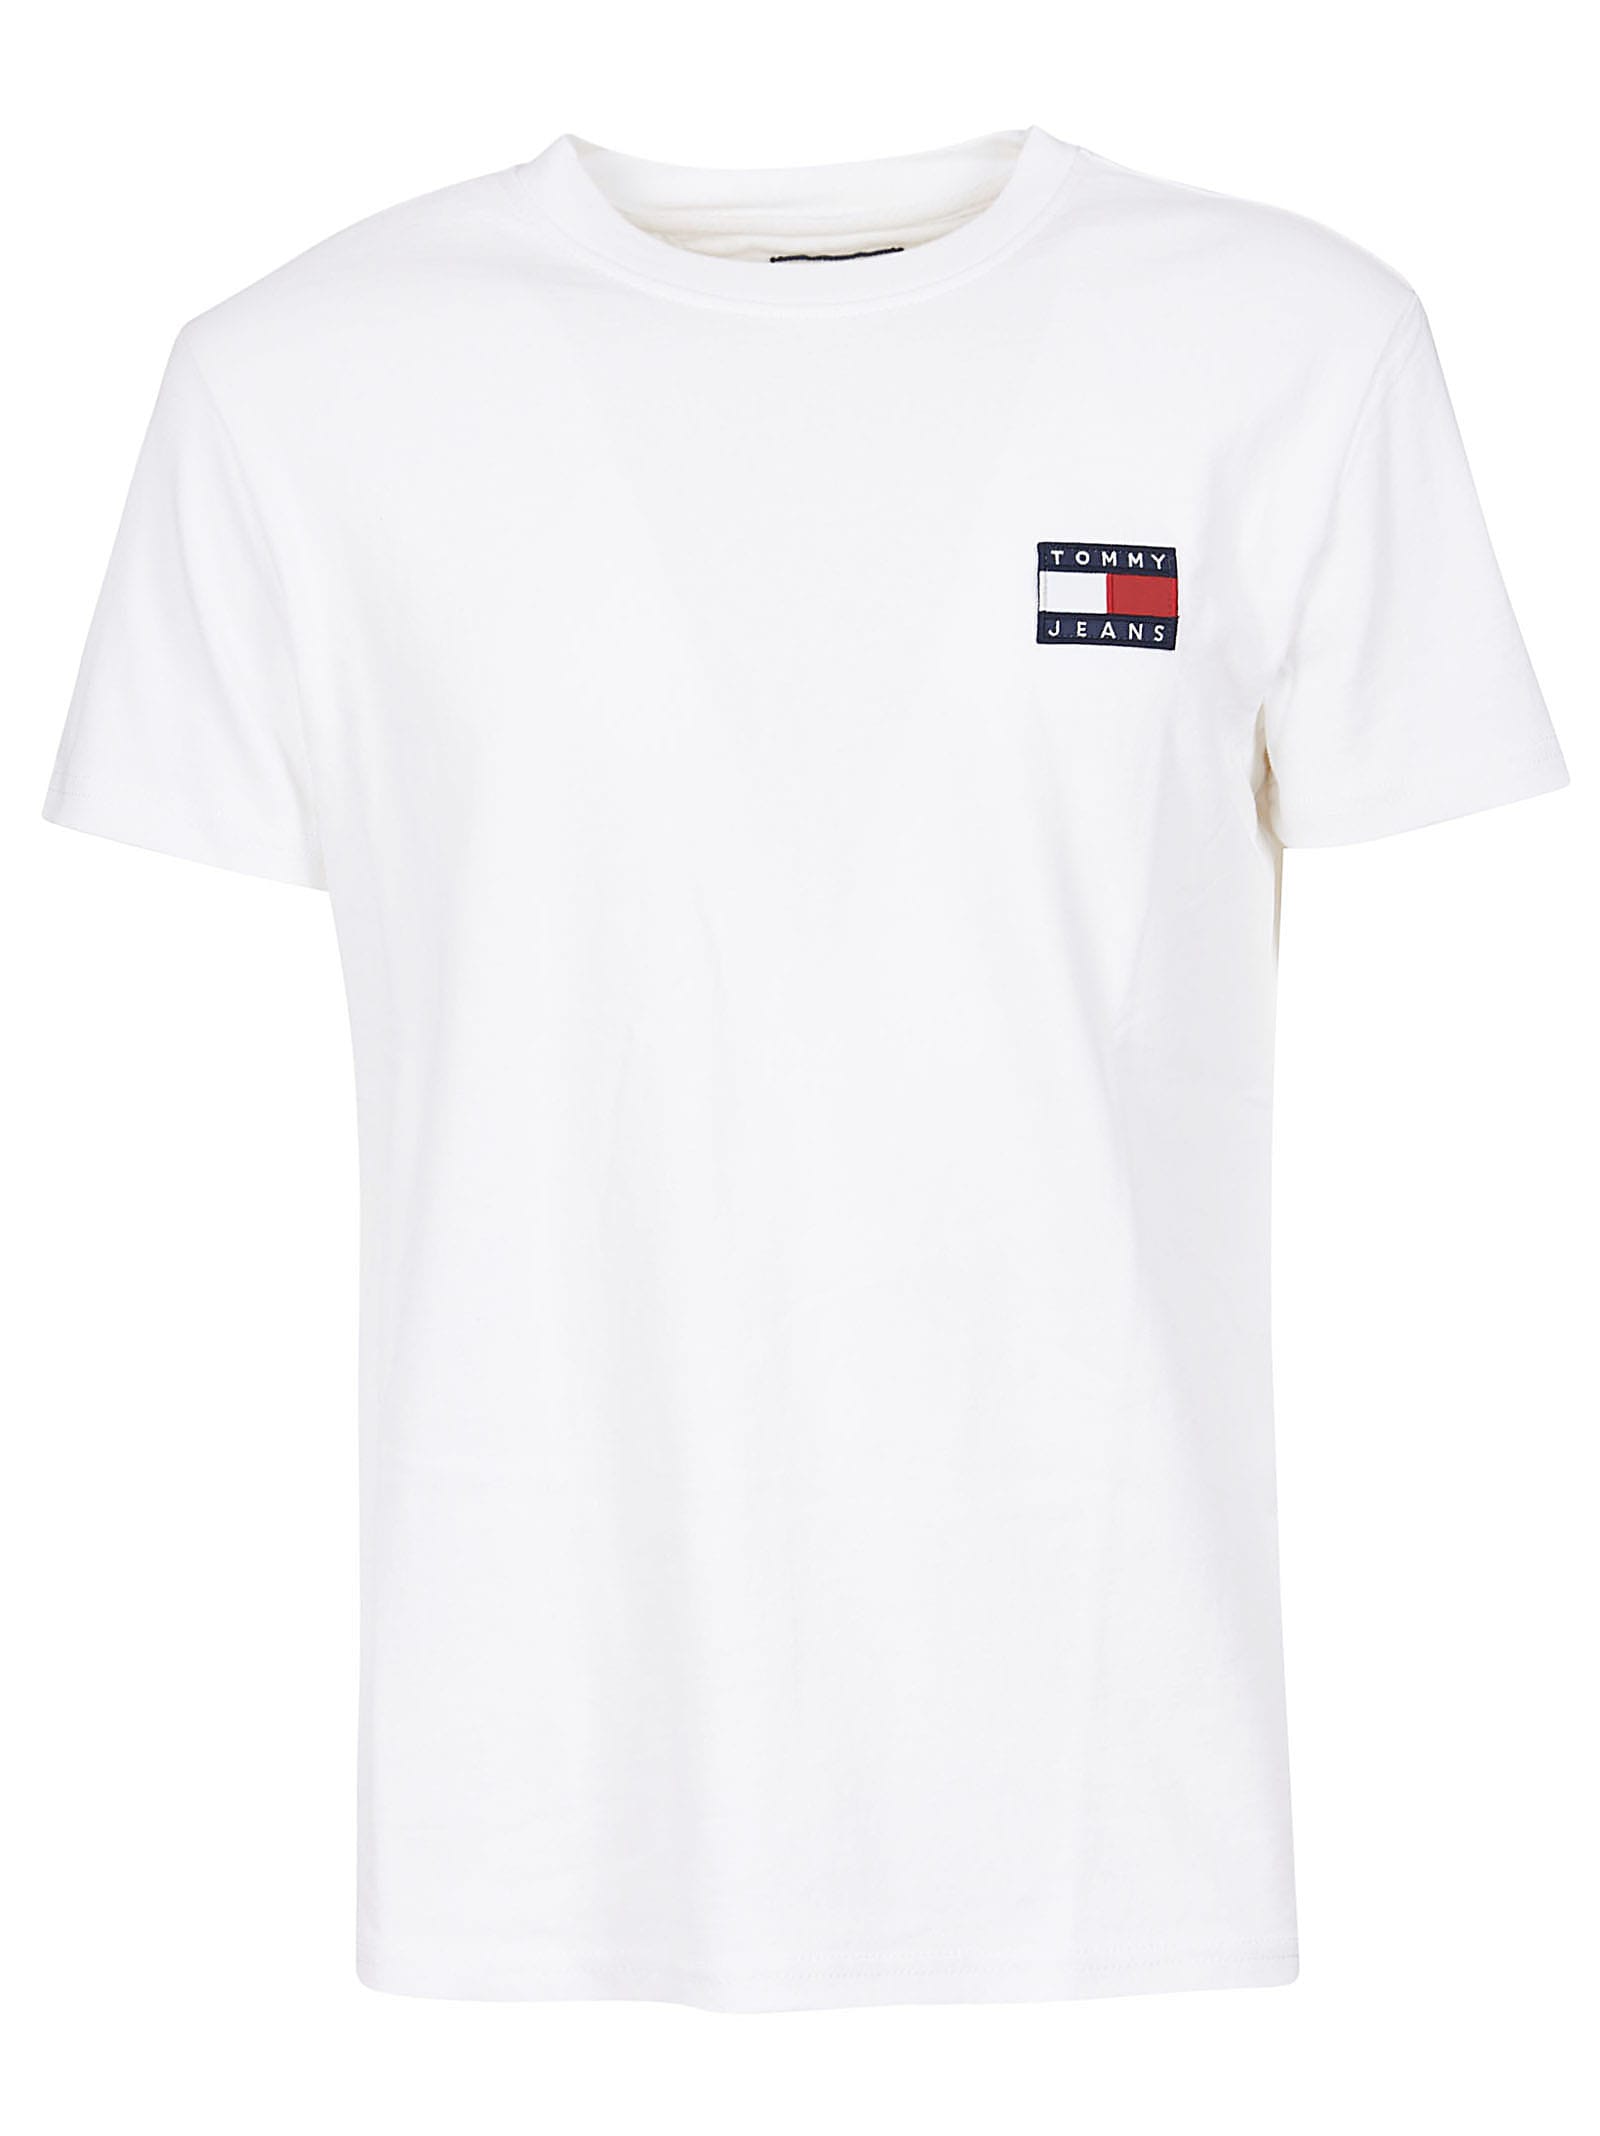 New look tommy hilfiger embroidered logo t shirt macy's